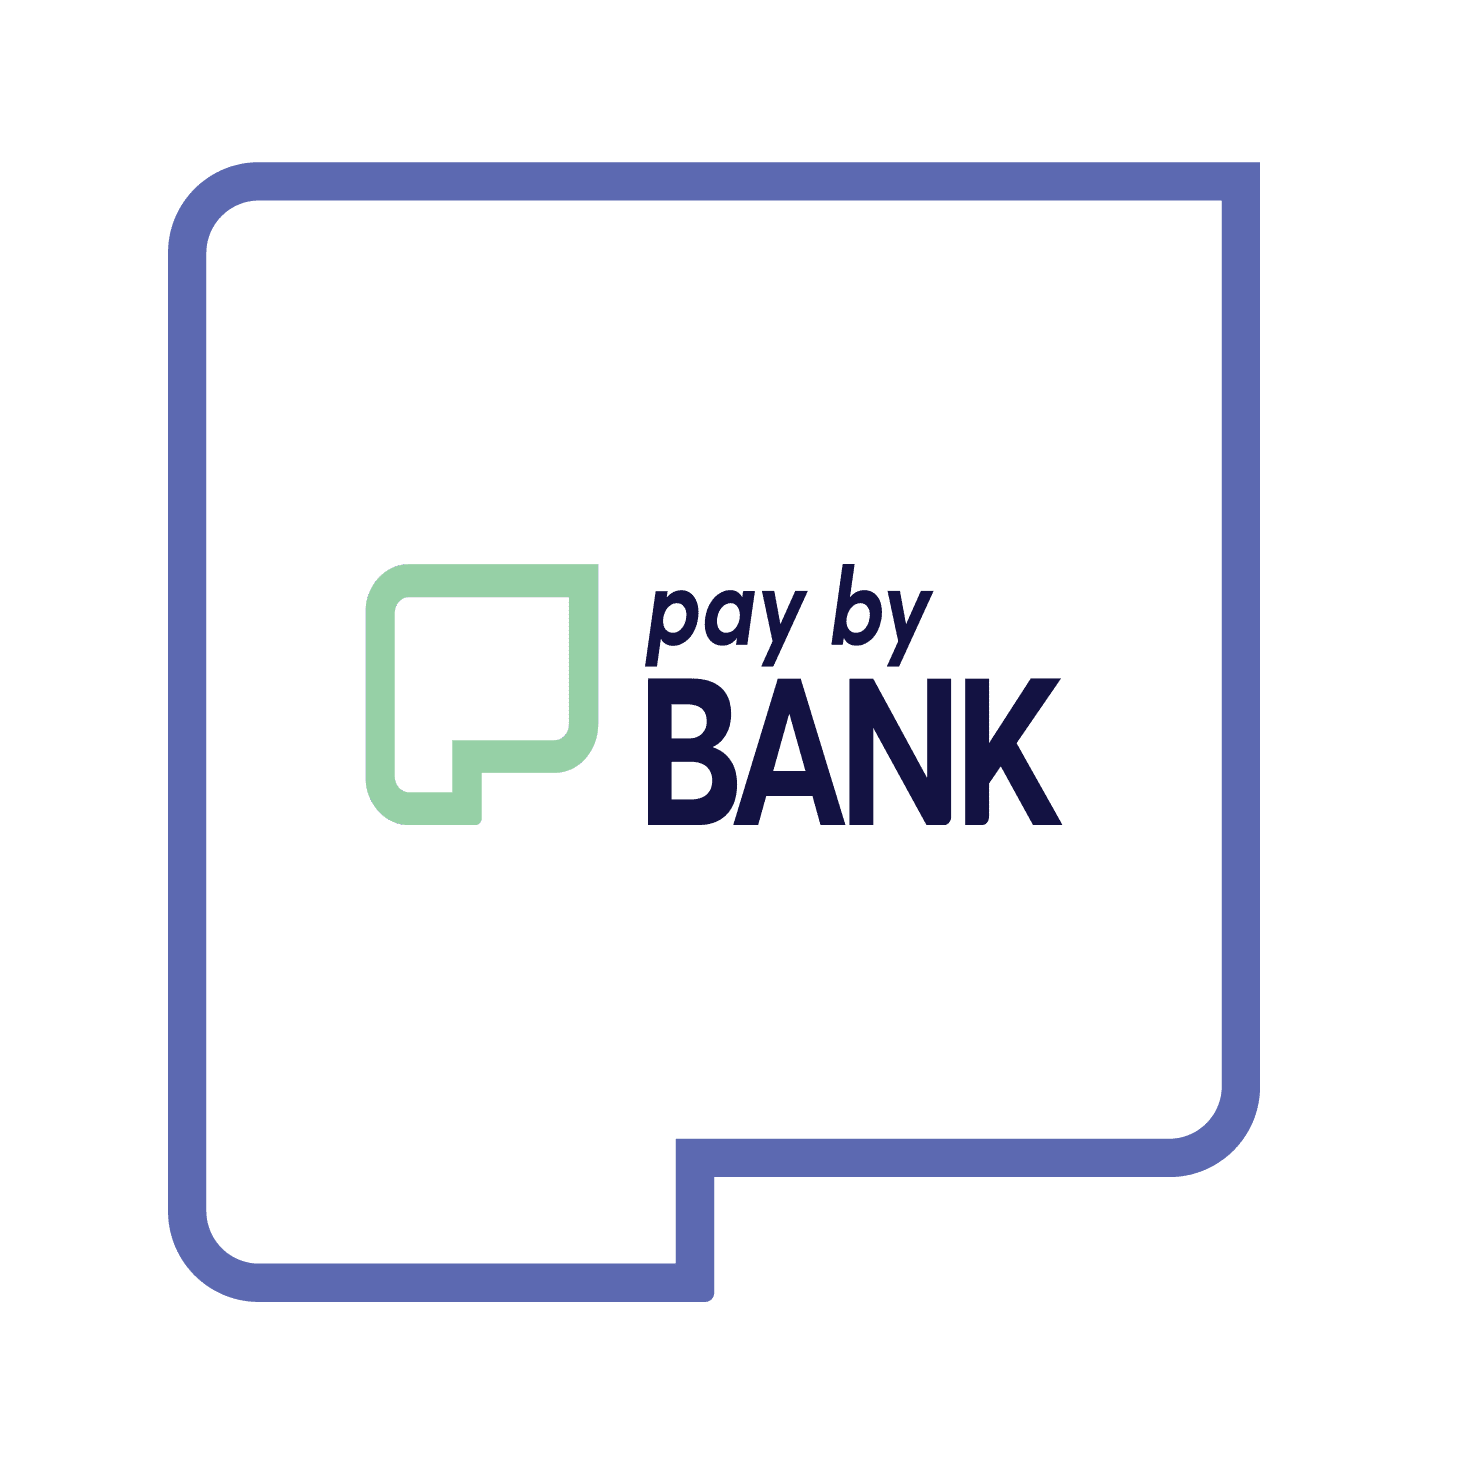 Pay by Bank - _P_ Payment Method Page Logo - Compressed